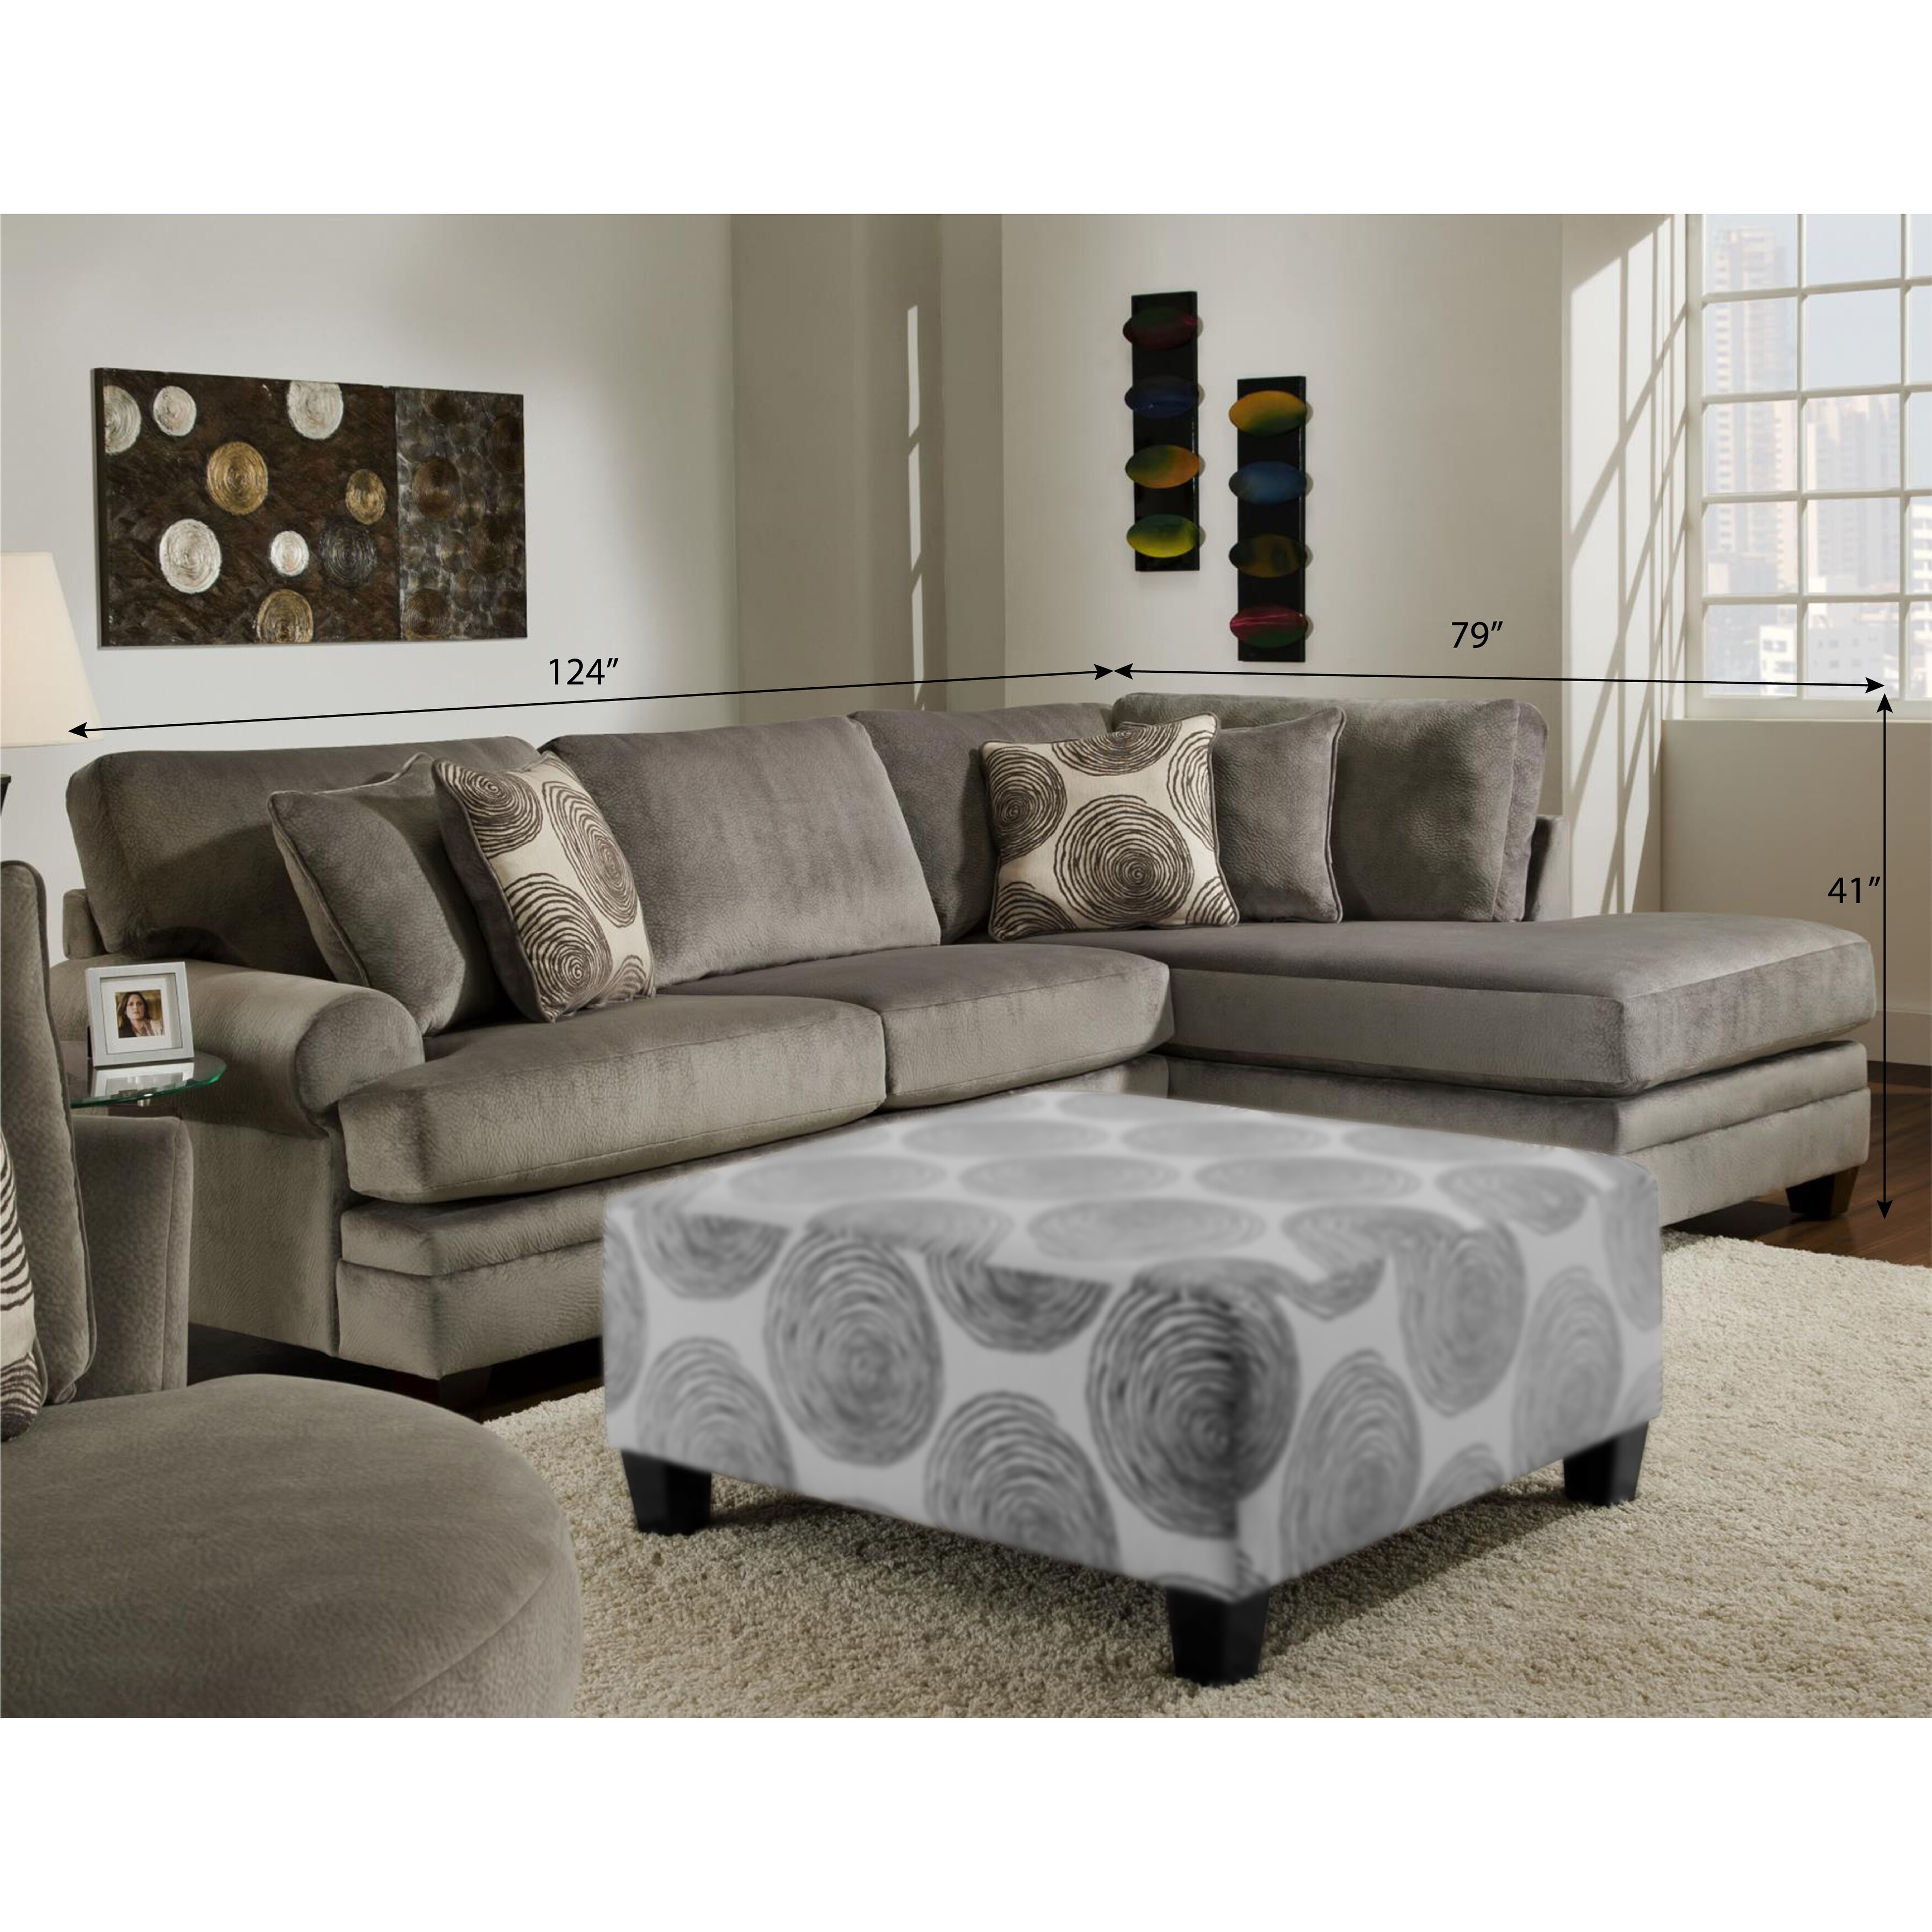 https://ak1.ostkcdn.com/images/products/is/images/direct/c68fbec196b26384eed7fb3e64a9238dd0ef48eb/Natara-Contemporary-L-shape-Sectional-Sofa.jpg